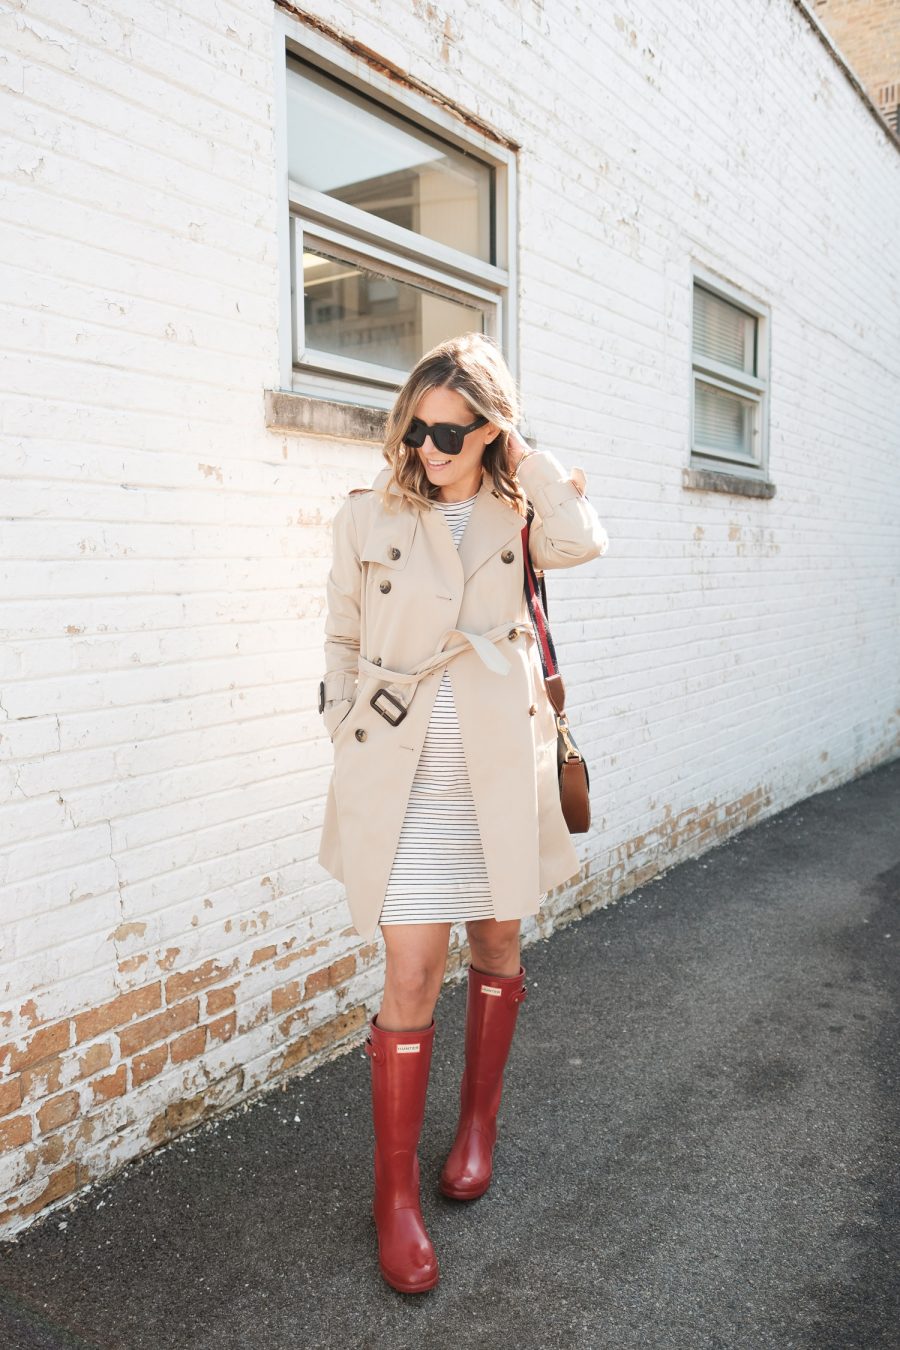 $30 sweatshirt dress with a trench coat, rain boots, and crossbody bag